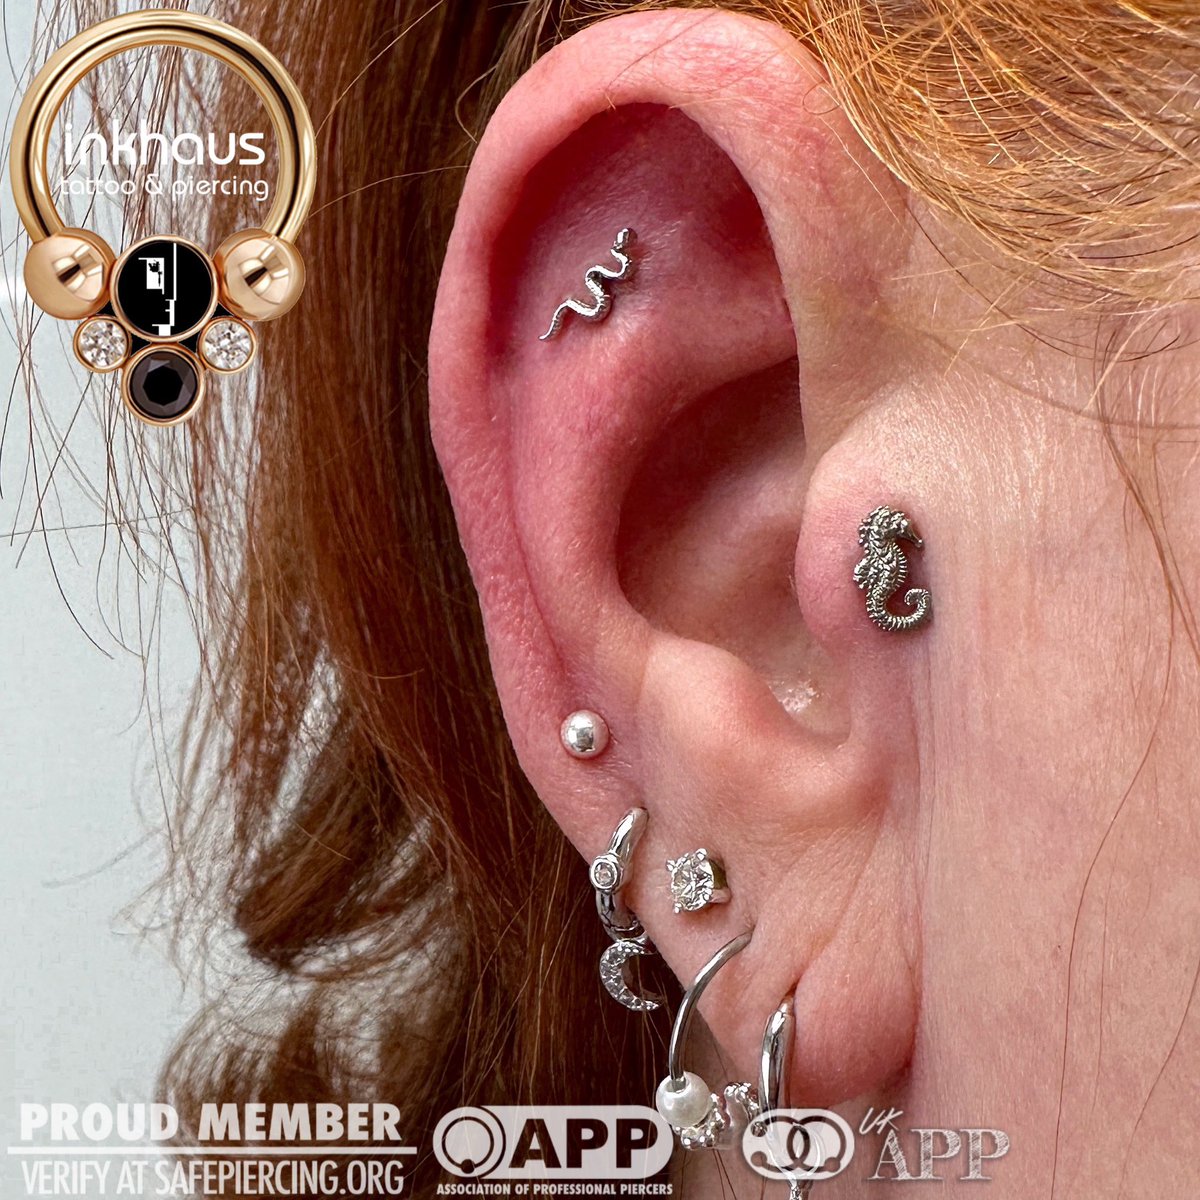 This client made some really beautiful choices for her new #piercings! 🤩 For her flat, she chose a tiny snake from @BODYVISIONLA and for her tragus she chose a seahorse from @ANATOMETAL. Both in white gold and crafted in exquisite detail. ✨ #safepiercing #curatedear #teesside